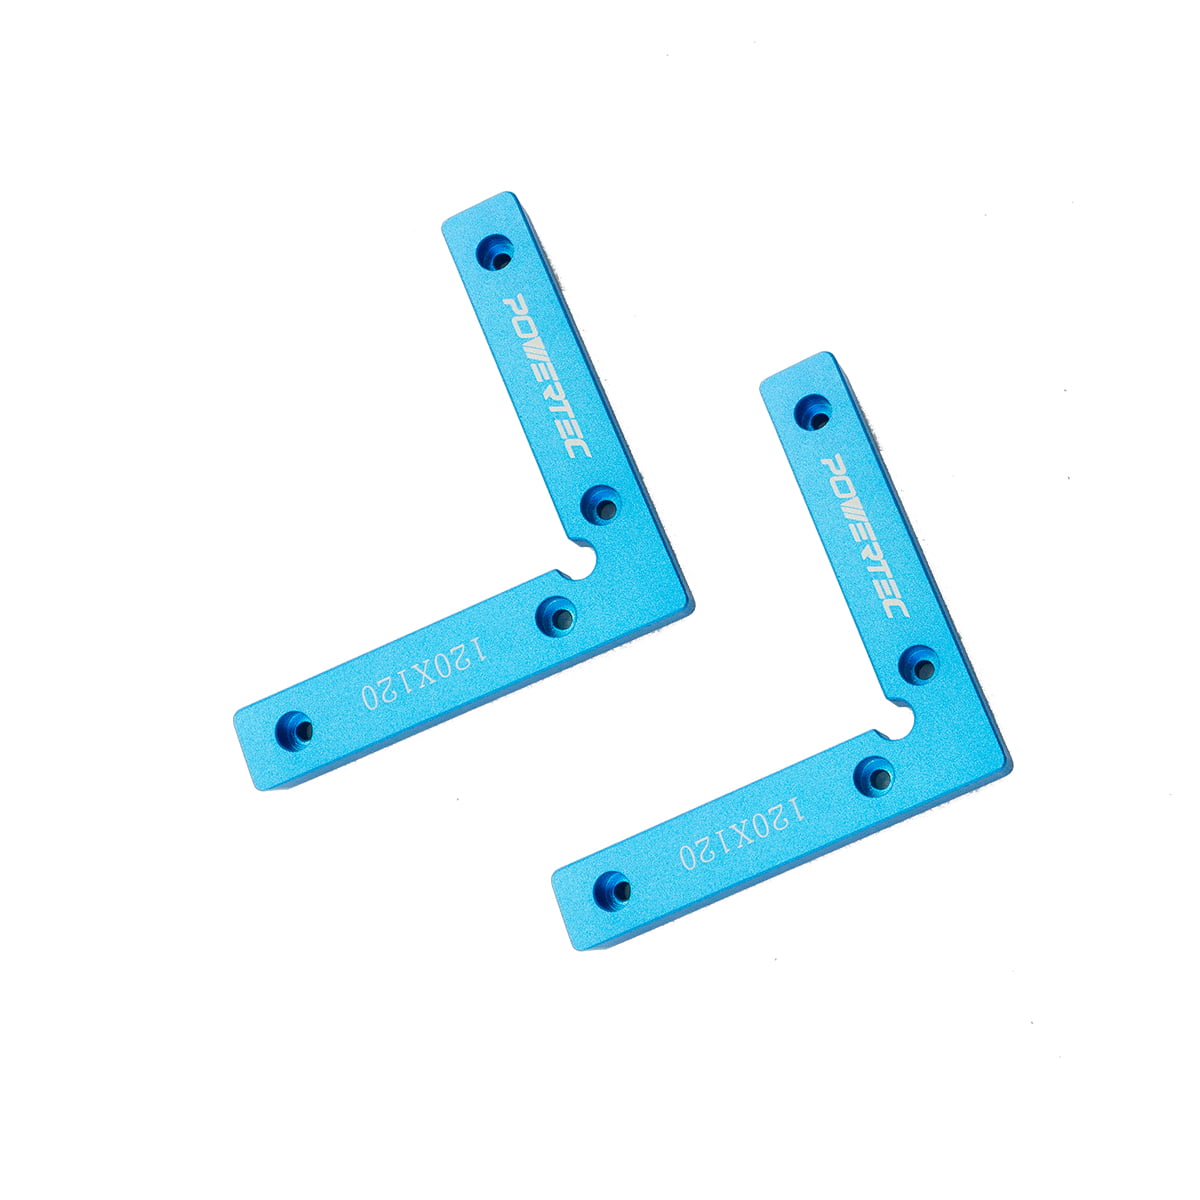 4pcs Fibreglass Nylon Material Help Create Projects with Square Corners Eapele 6inch 90° Positioning Square Woodworking Clamps 